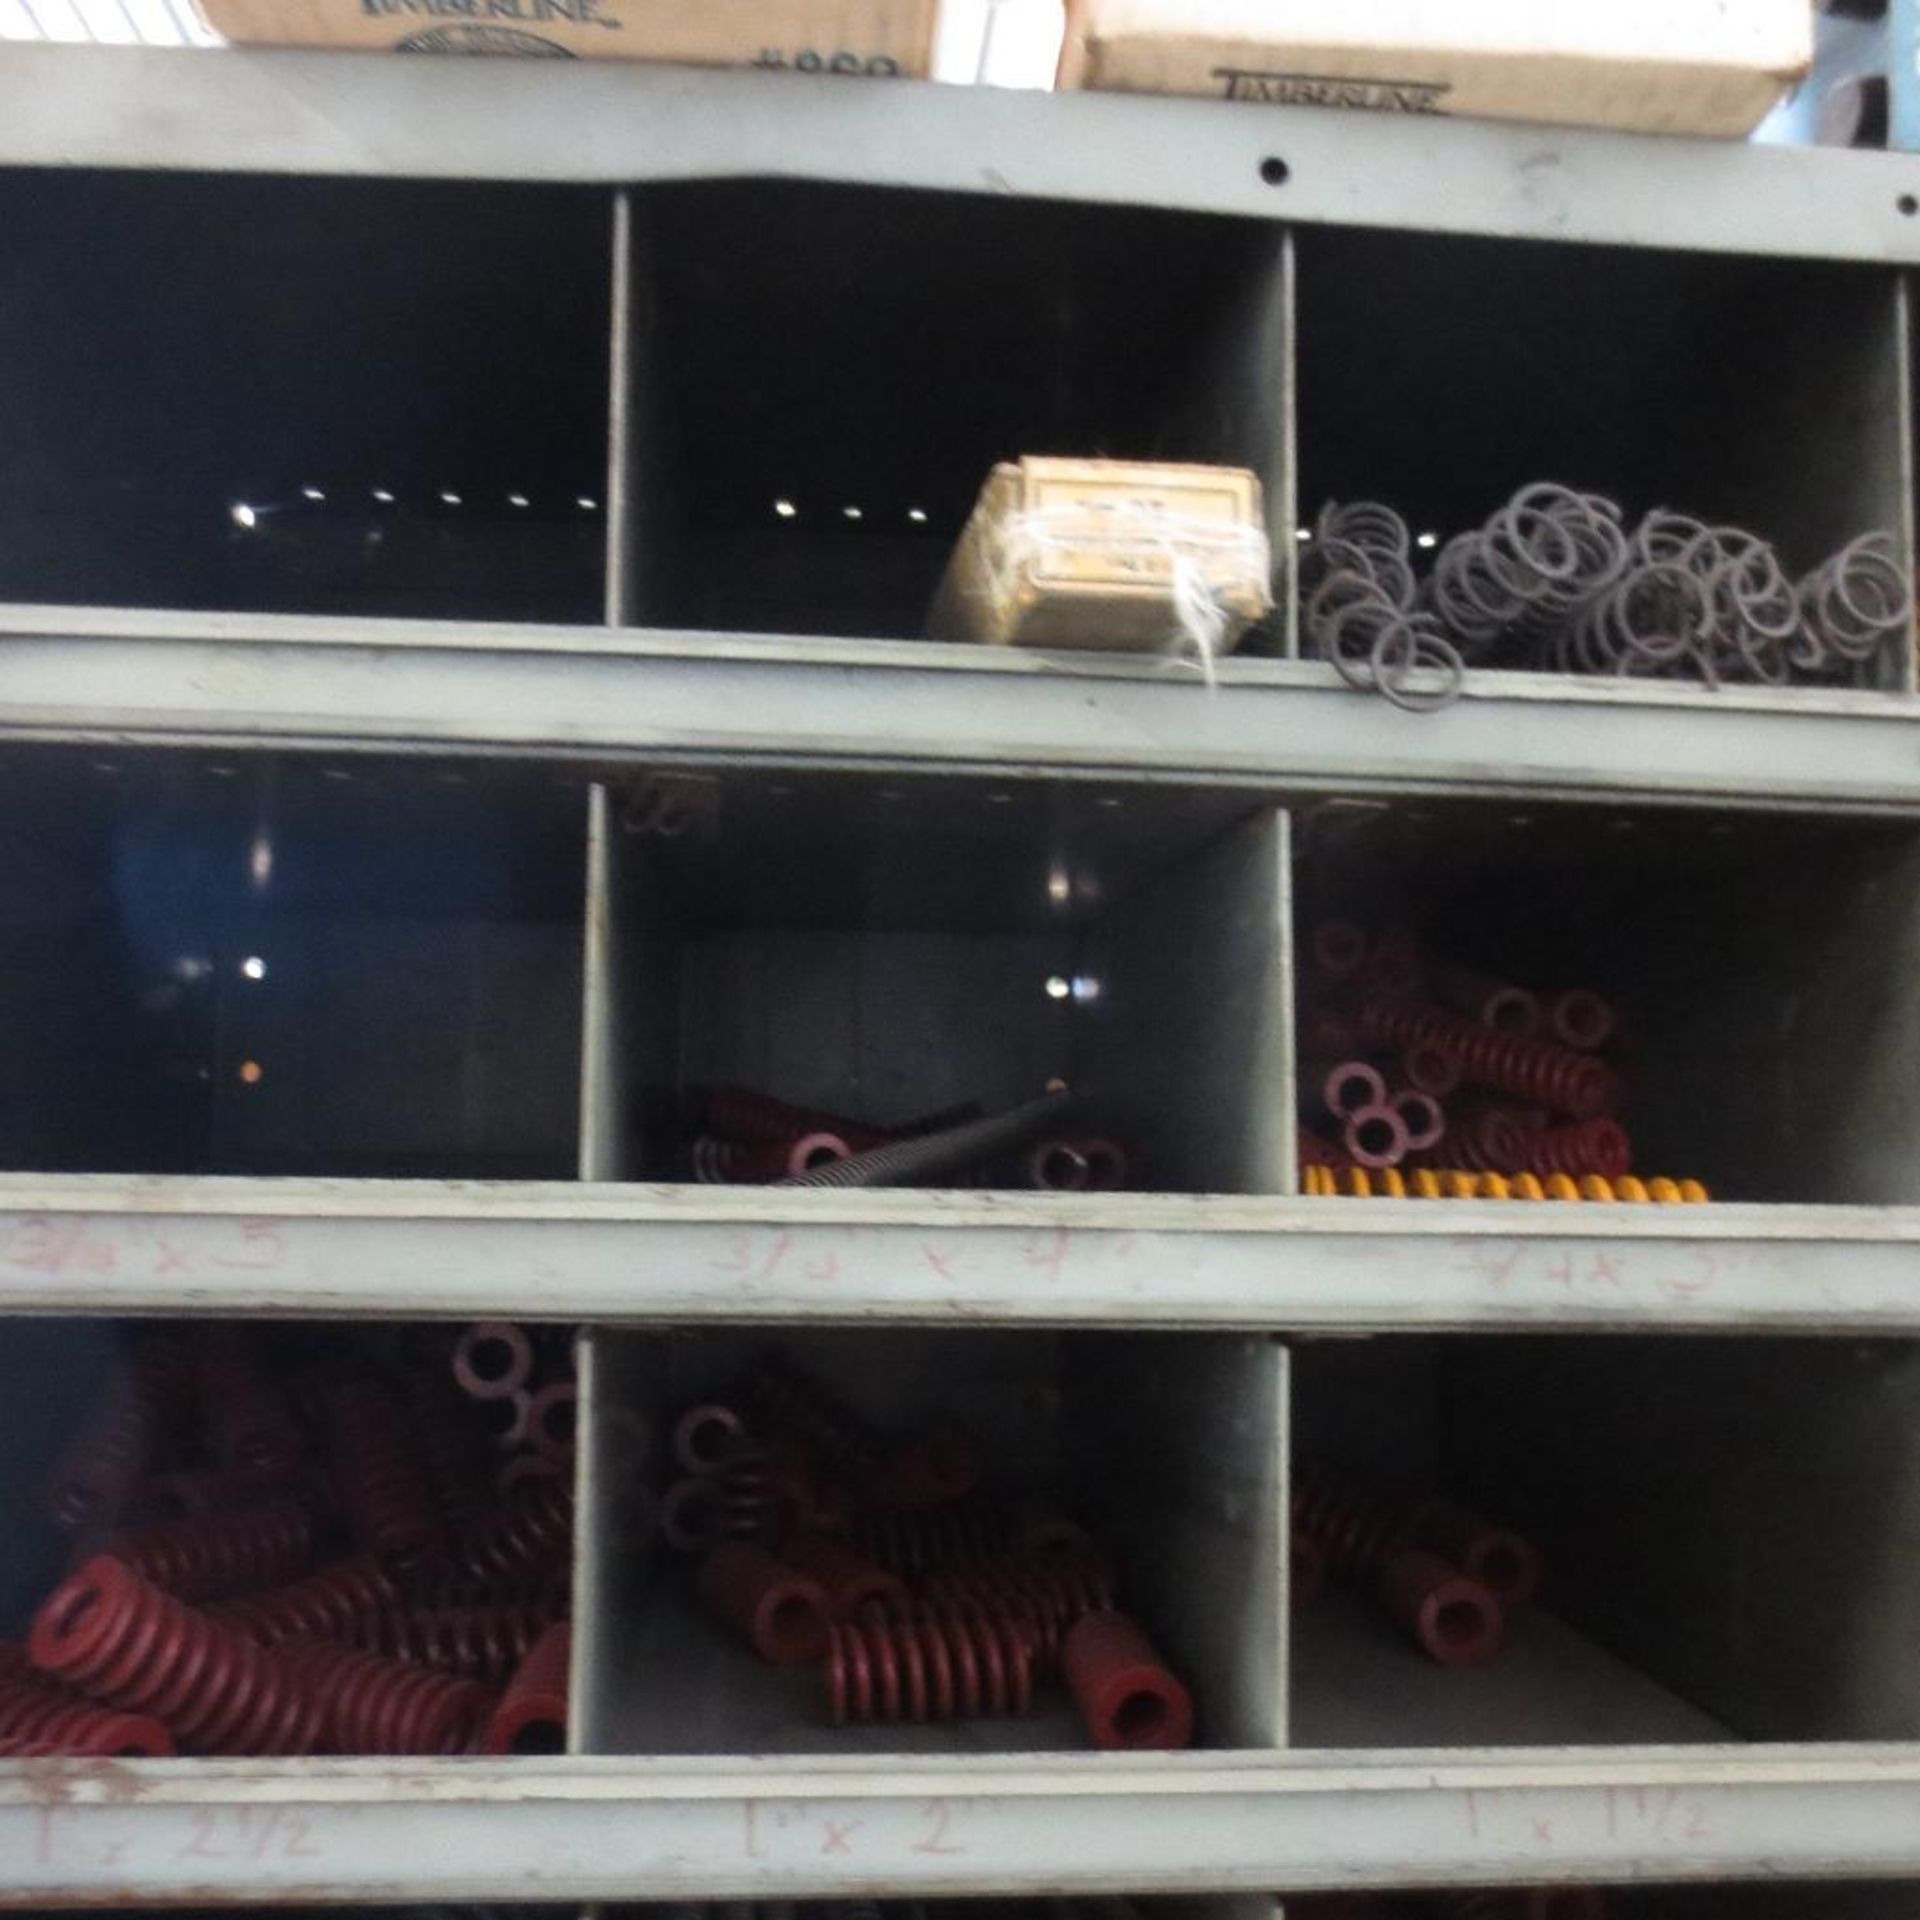 Shelf with Die Springs, LOCATED AT 1850 Howard Street, Unit A Elk Grove Village, IL - Image 5 of 5